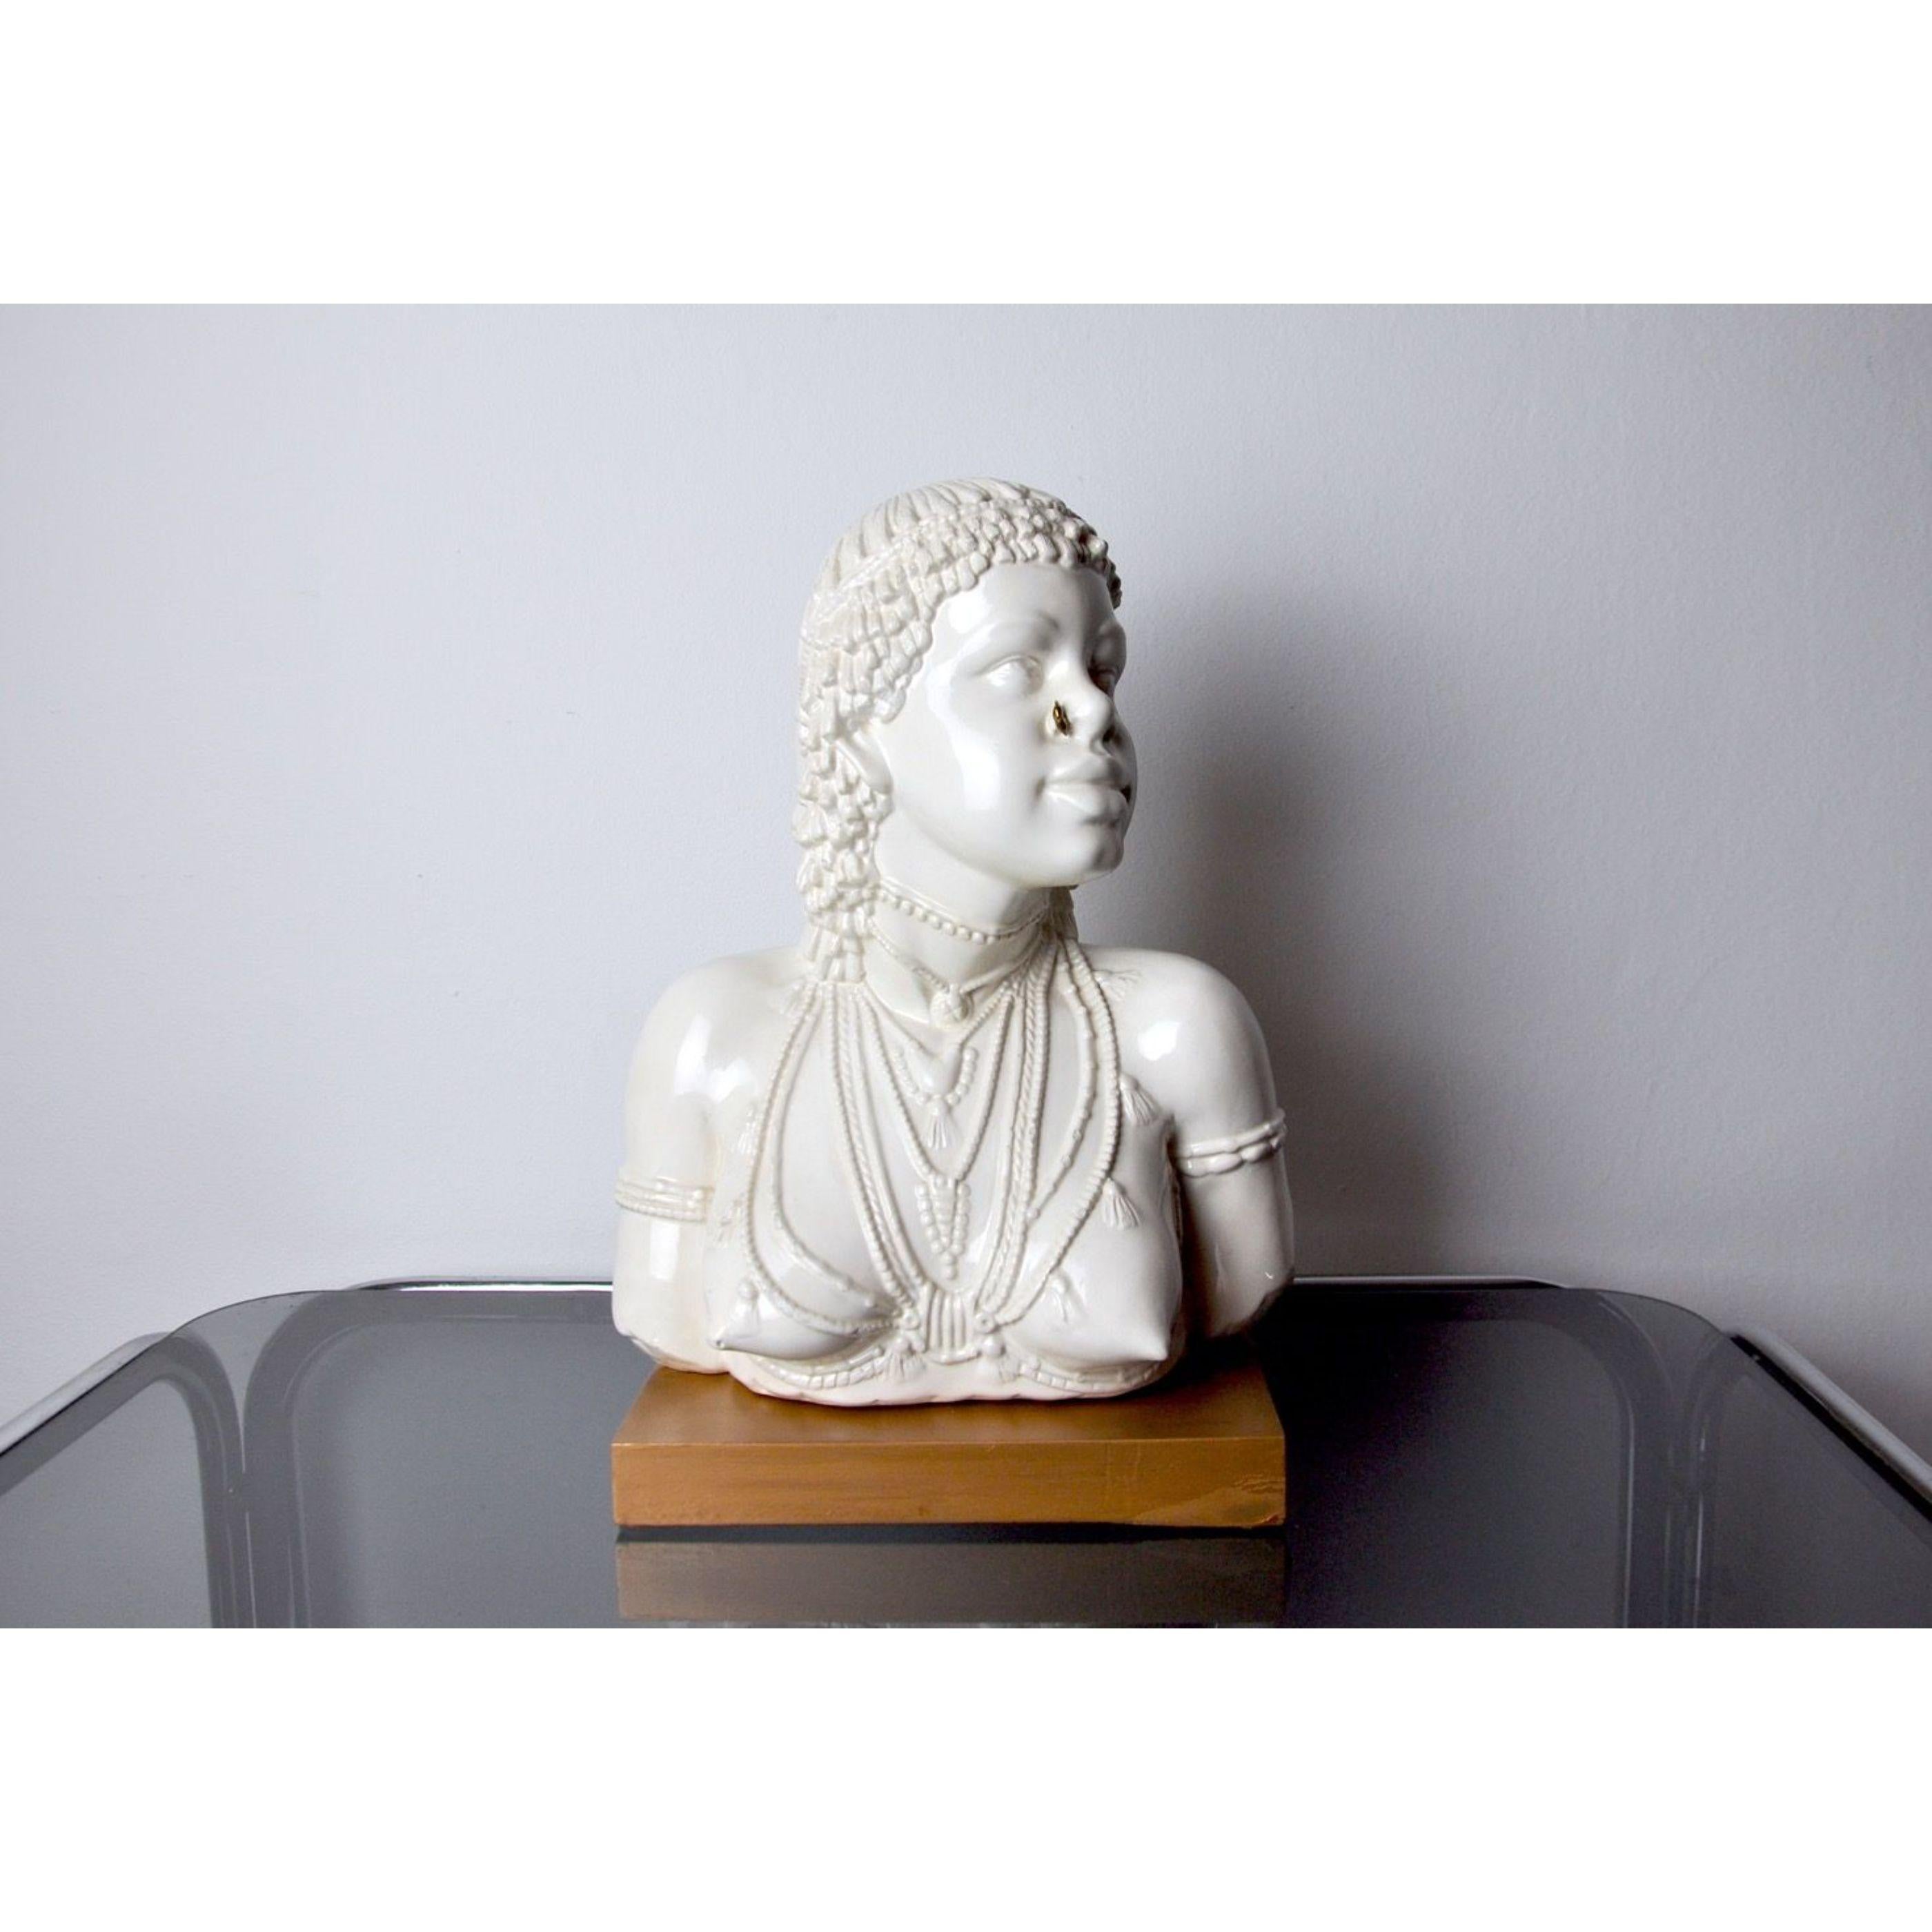 Hollywood Regency Vintage Sculpture of a White Ceramic Aboriginal Woman Bust, Italy 1970 For Sale